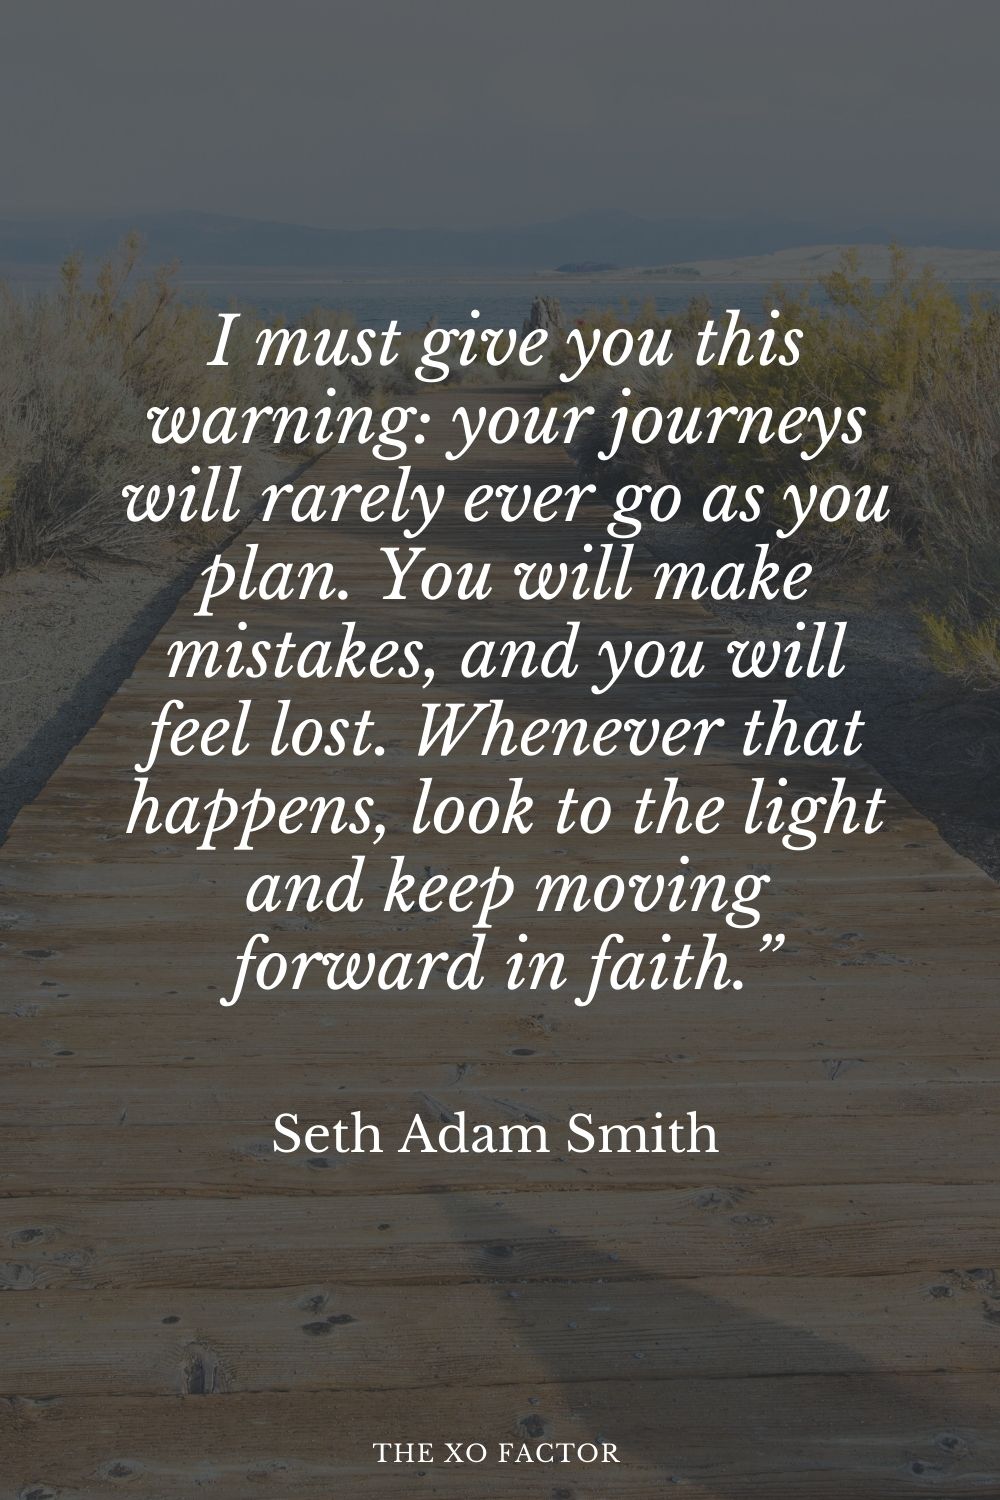 “I must give you this warning: your journeys will rarely ever go as you plan. You will make mistakes, and you will feel lost. Whenever that happens, look to the light and keep moving forward in faith.” Seth Adam Smith